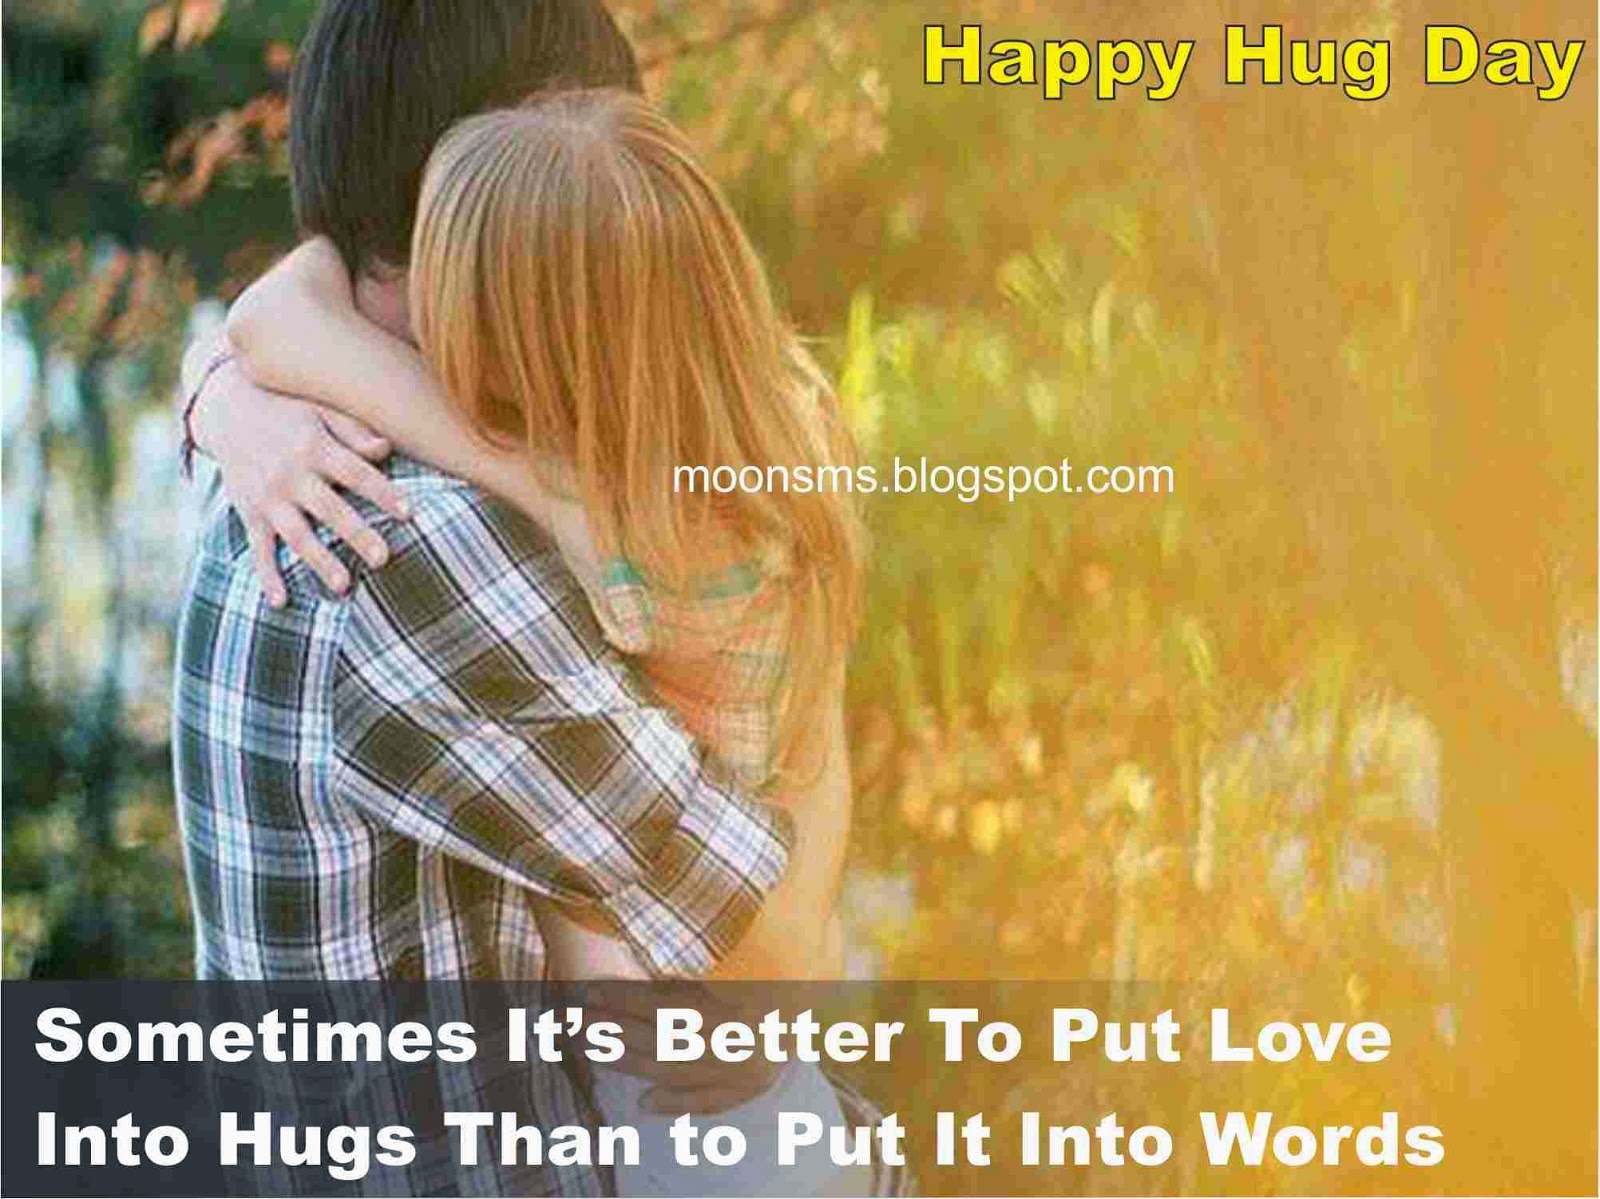 ... Hug Day sms text message wishes quotes, Hug day HD gif anjmted image